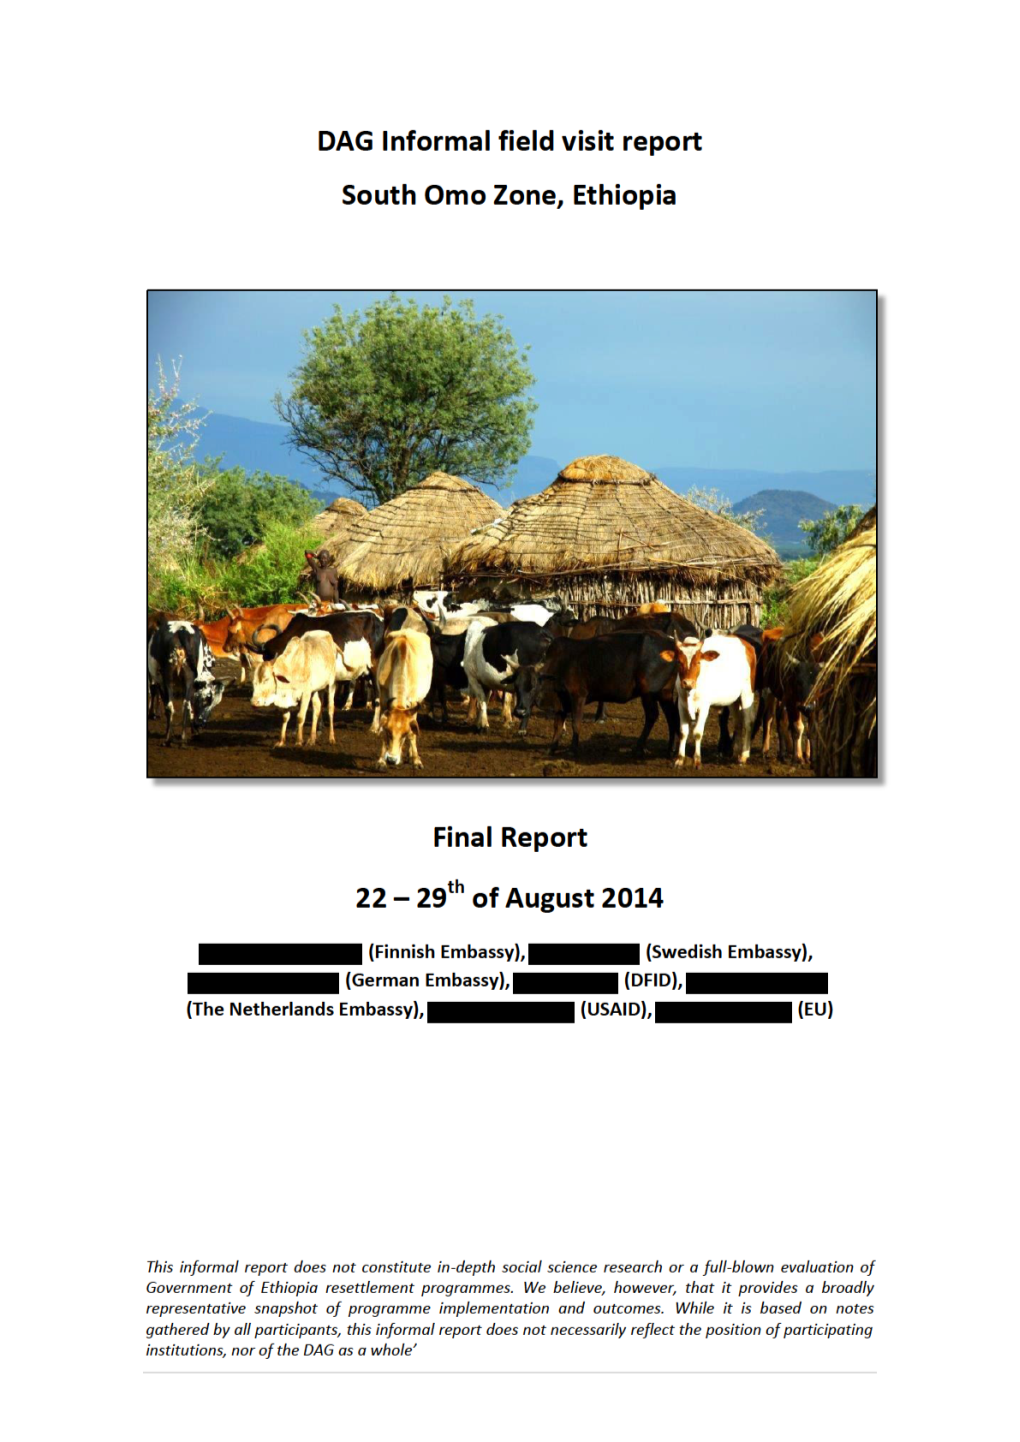 Report DAG Mission South Omo 22-29/08/2014